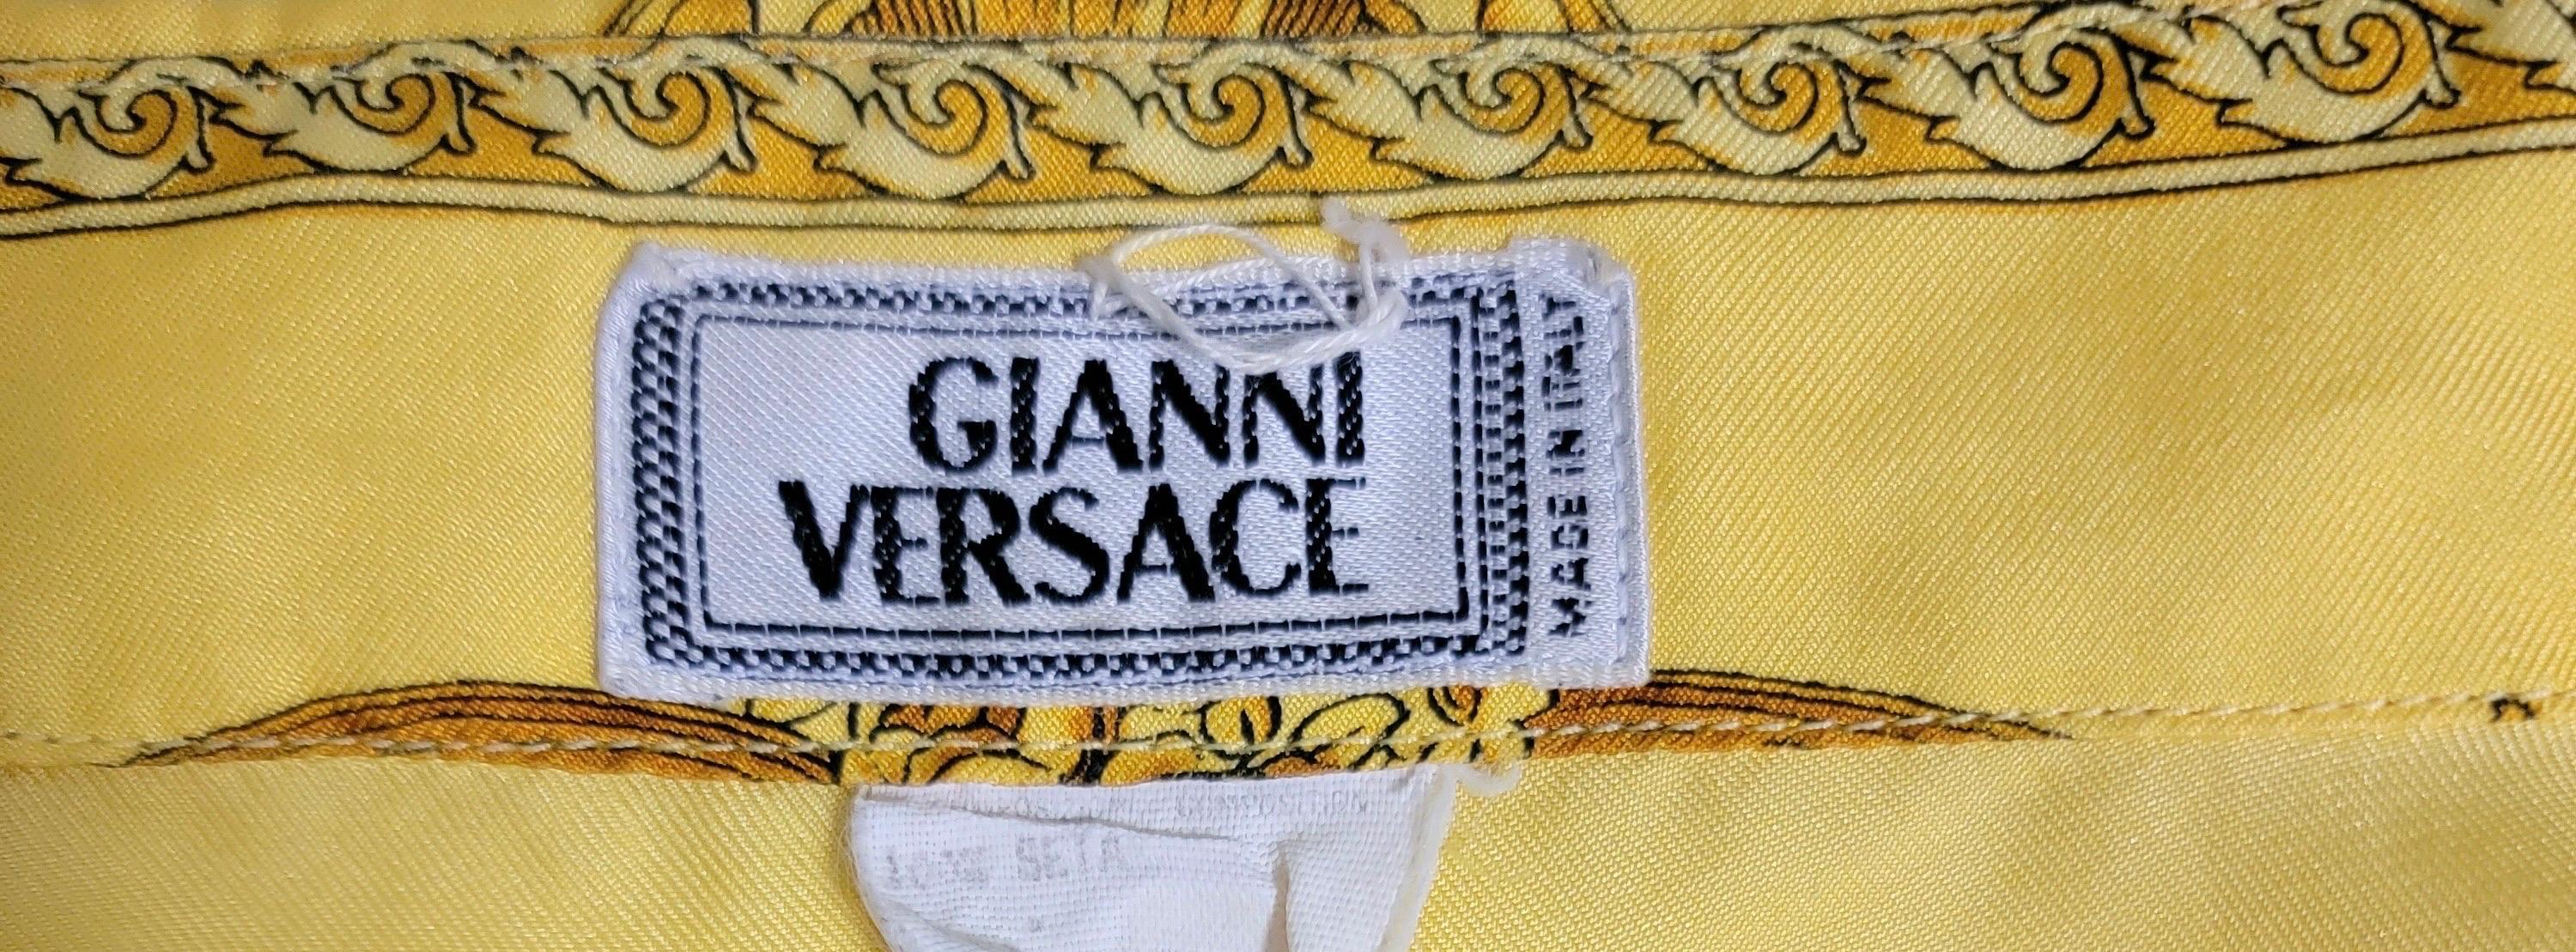 Gianni Versace Rococo Silk Shirt Men’s IT48 from 1995 For Sale 8